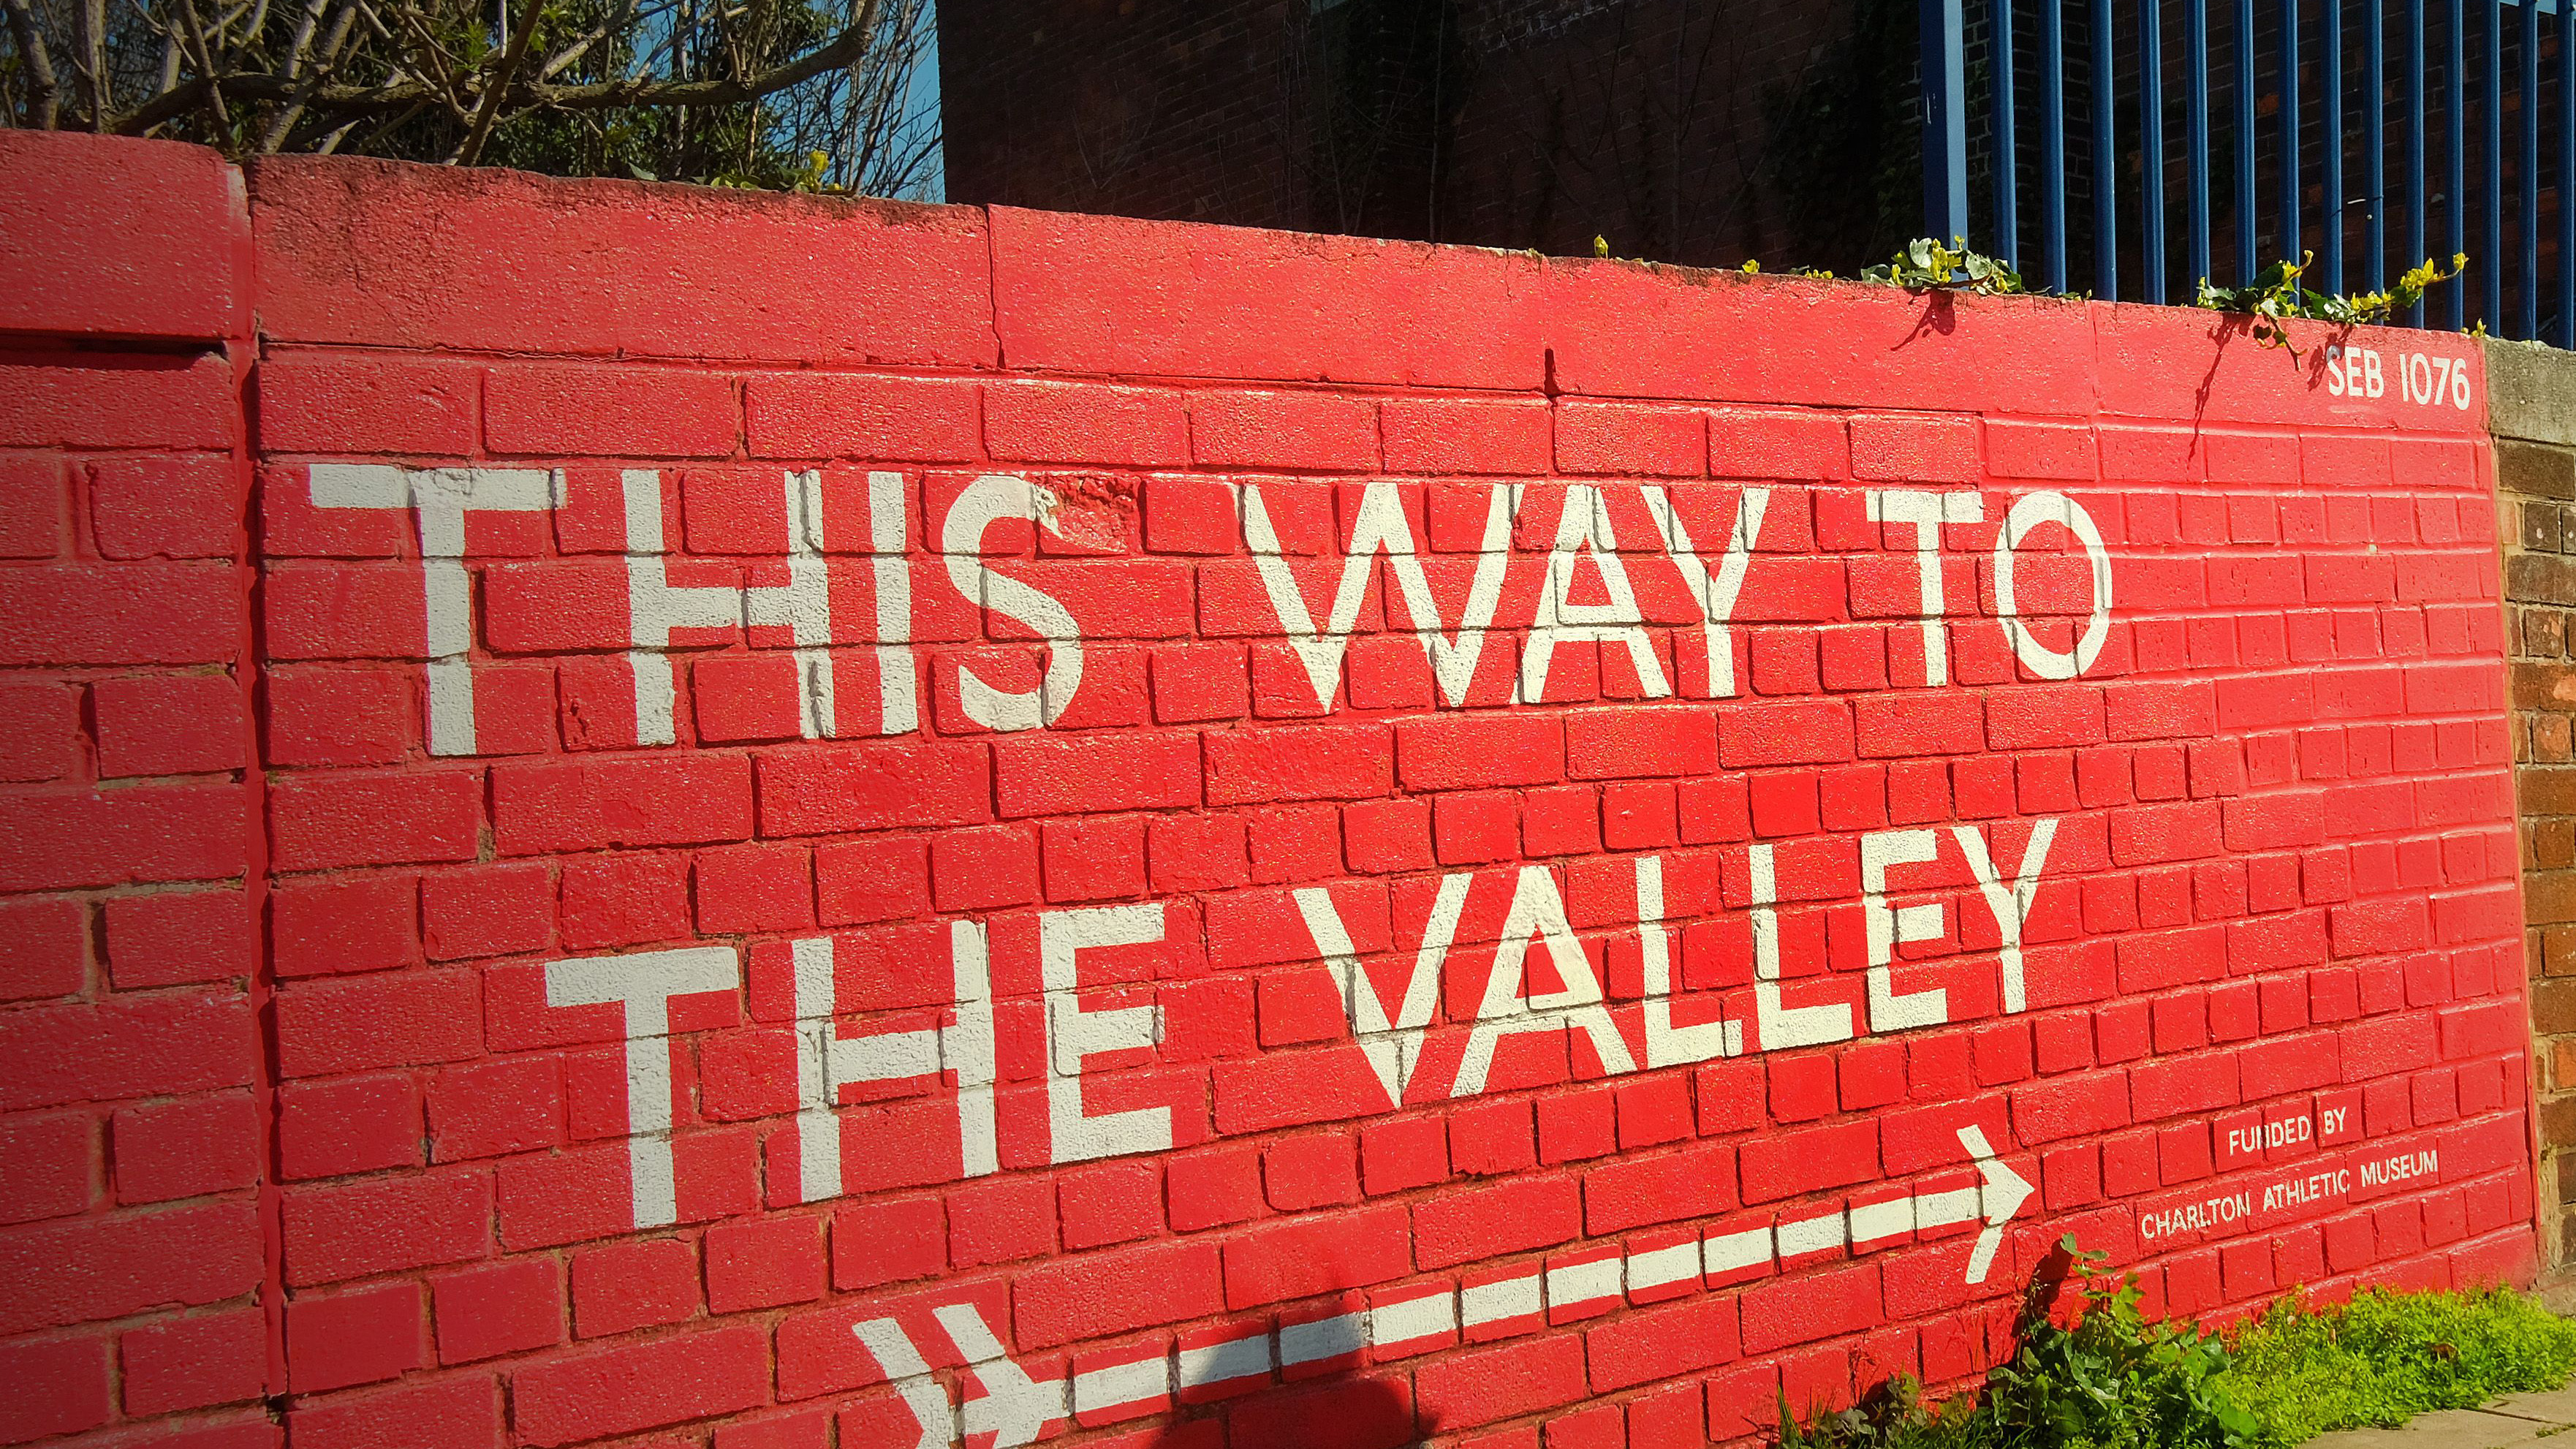 A wall painted red with the words "This way to The Valley" written on it.